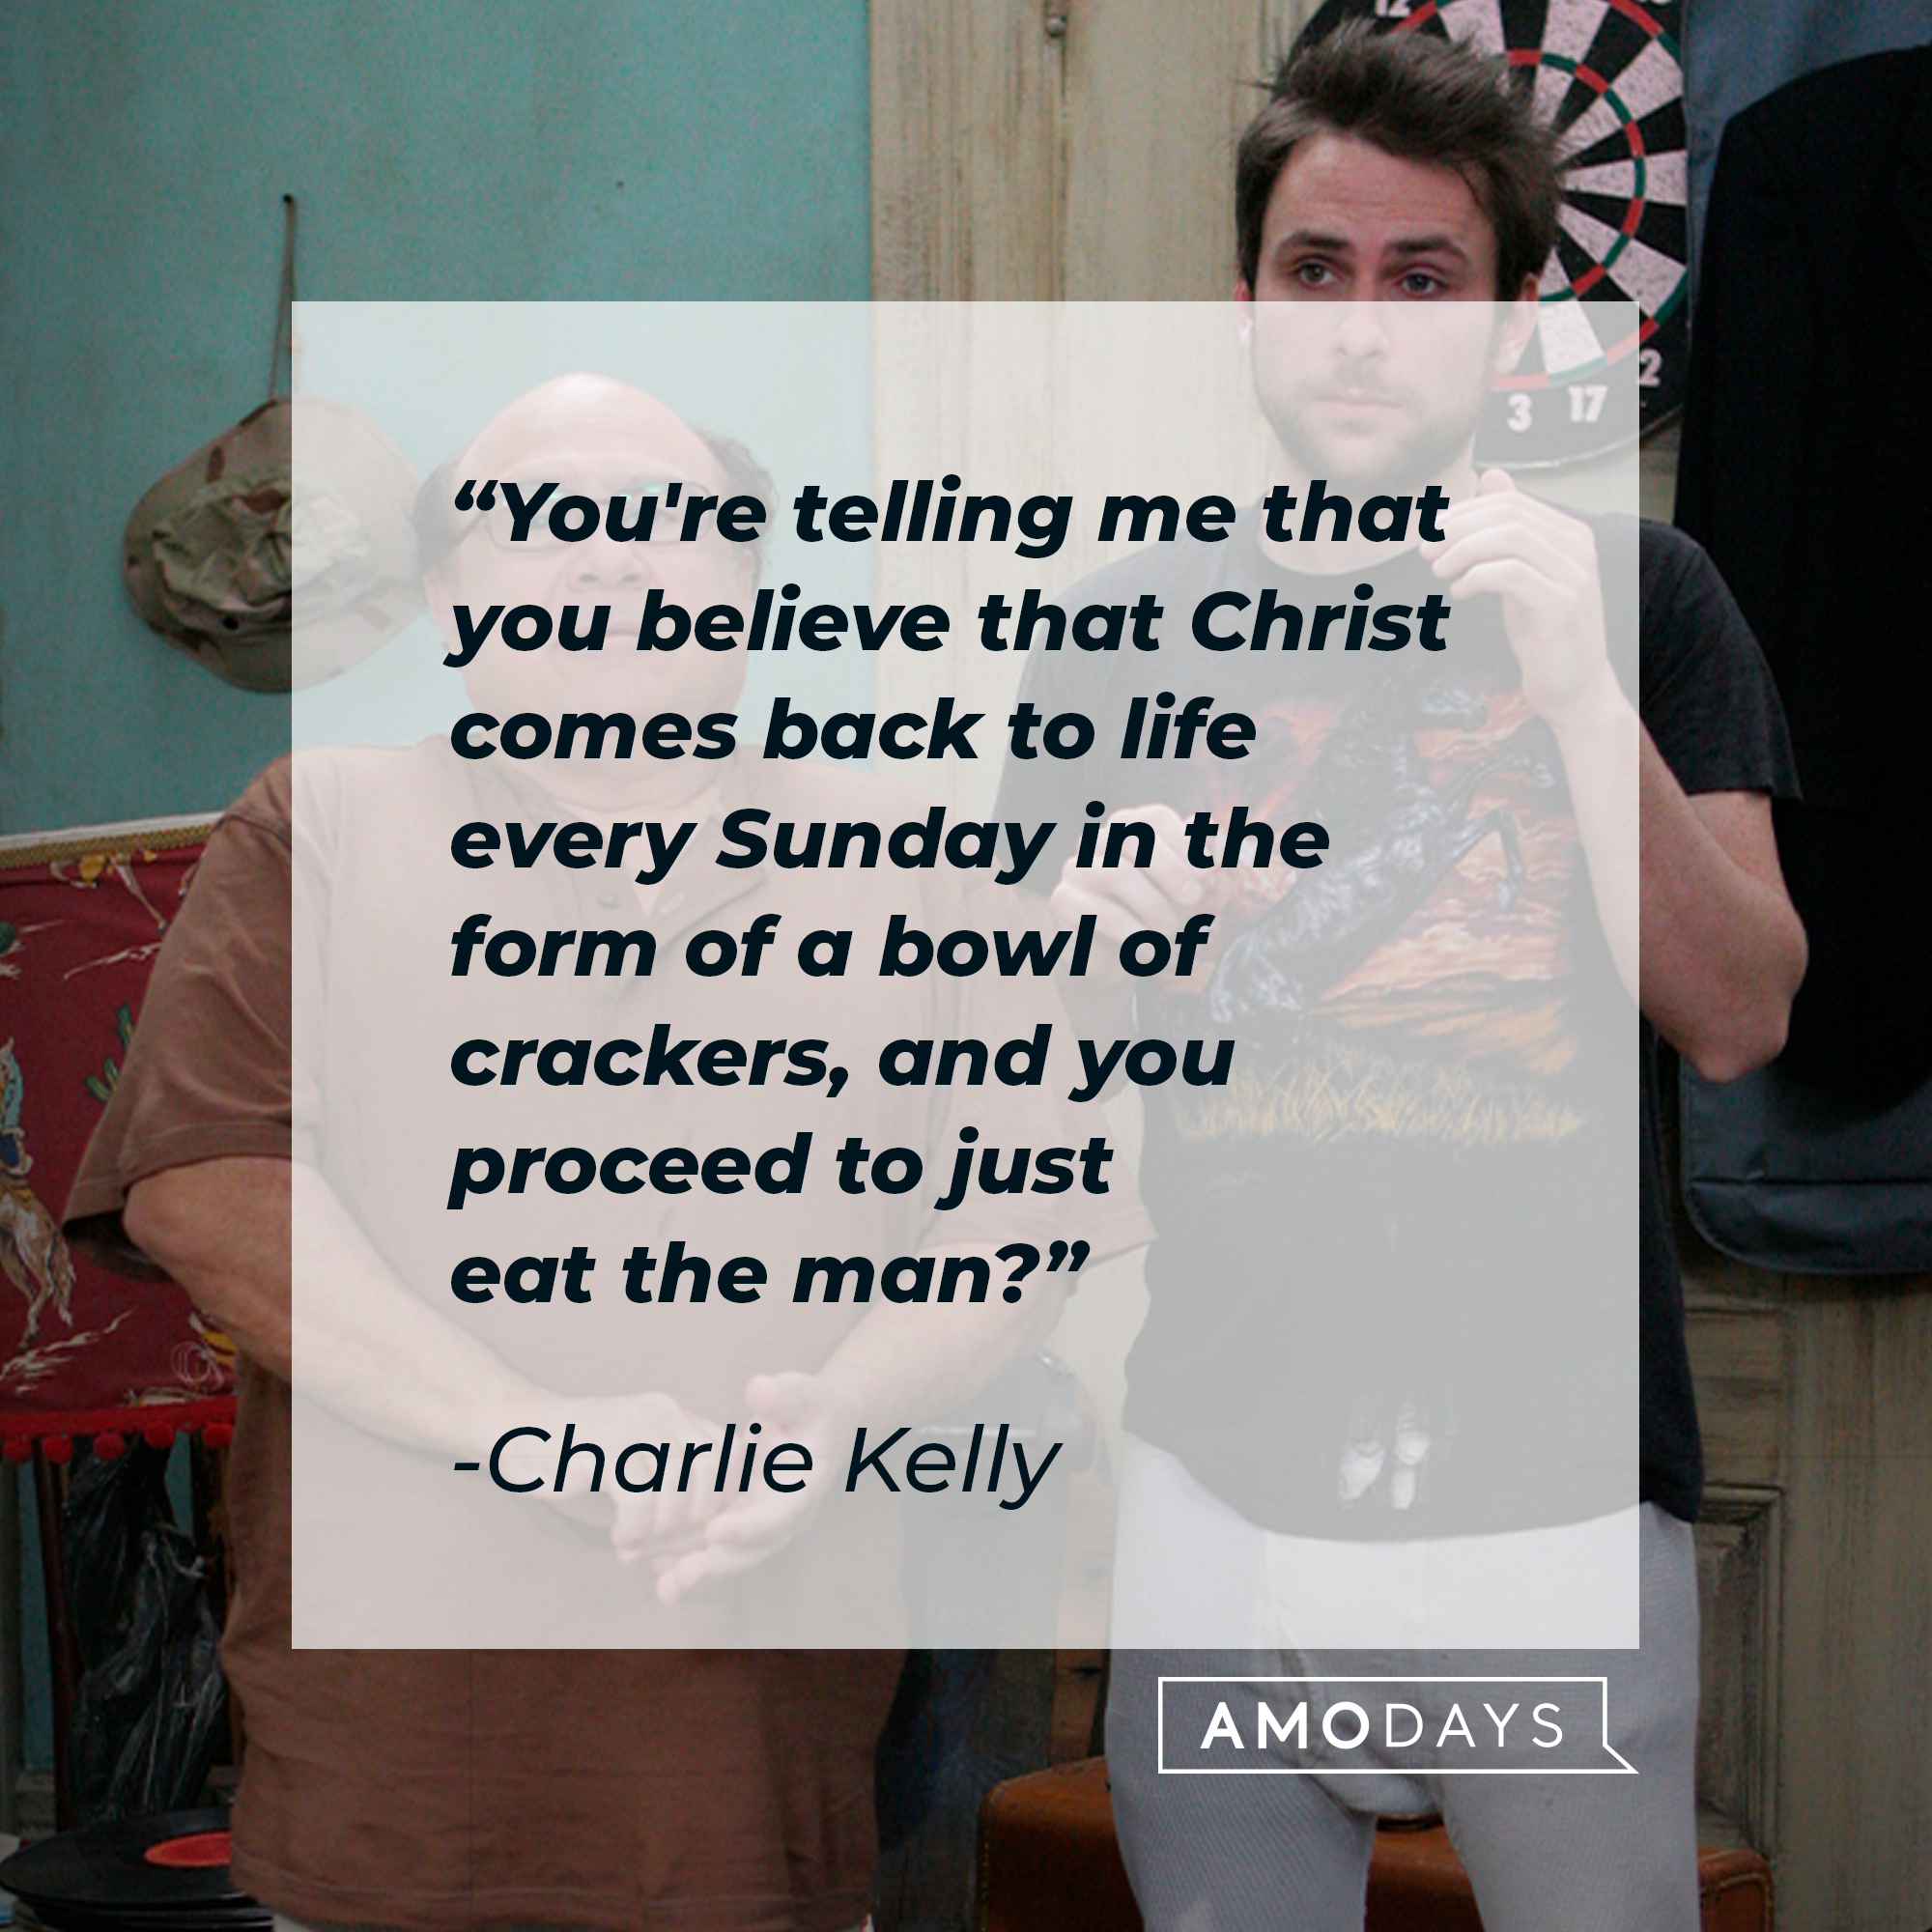 Charlie Kelly with his quote: "You're telling me that you believe that Christ comes back to life every Sunday in the form of a bowl of crackers, and you proceed to just eat the man?" | Source: Facebook/alwayssunny